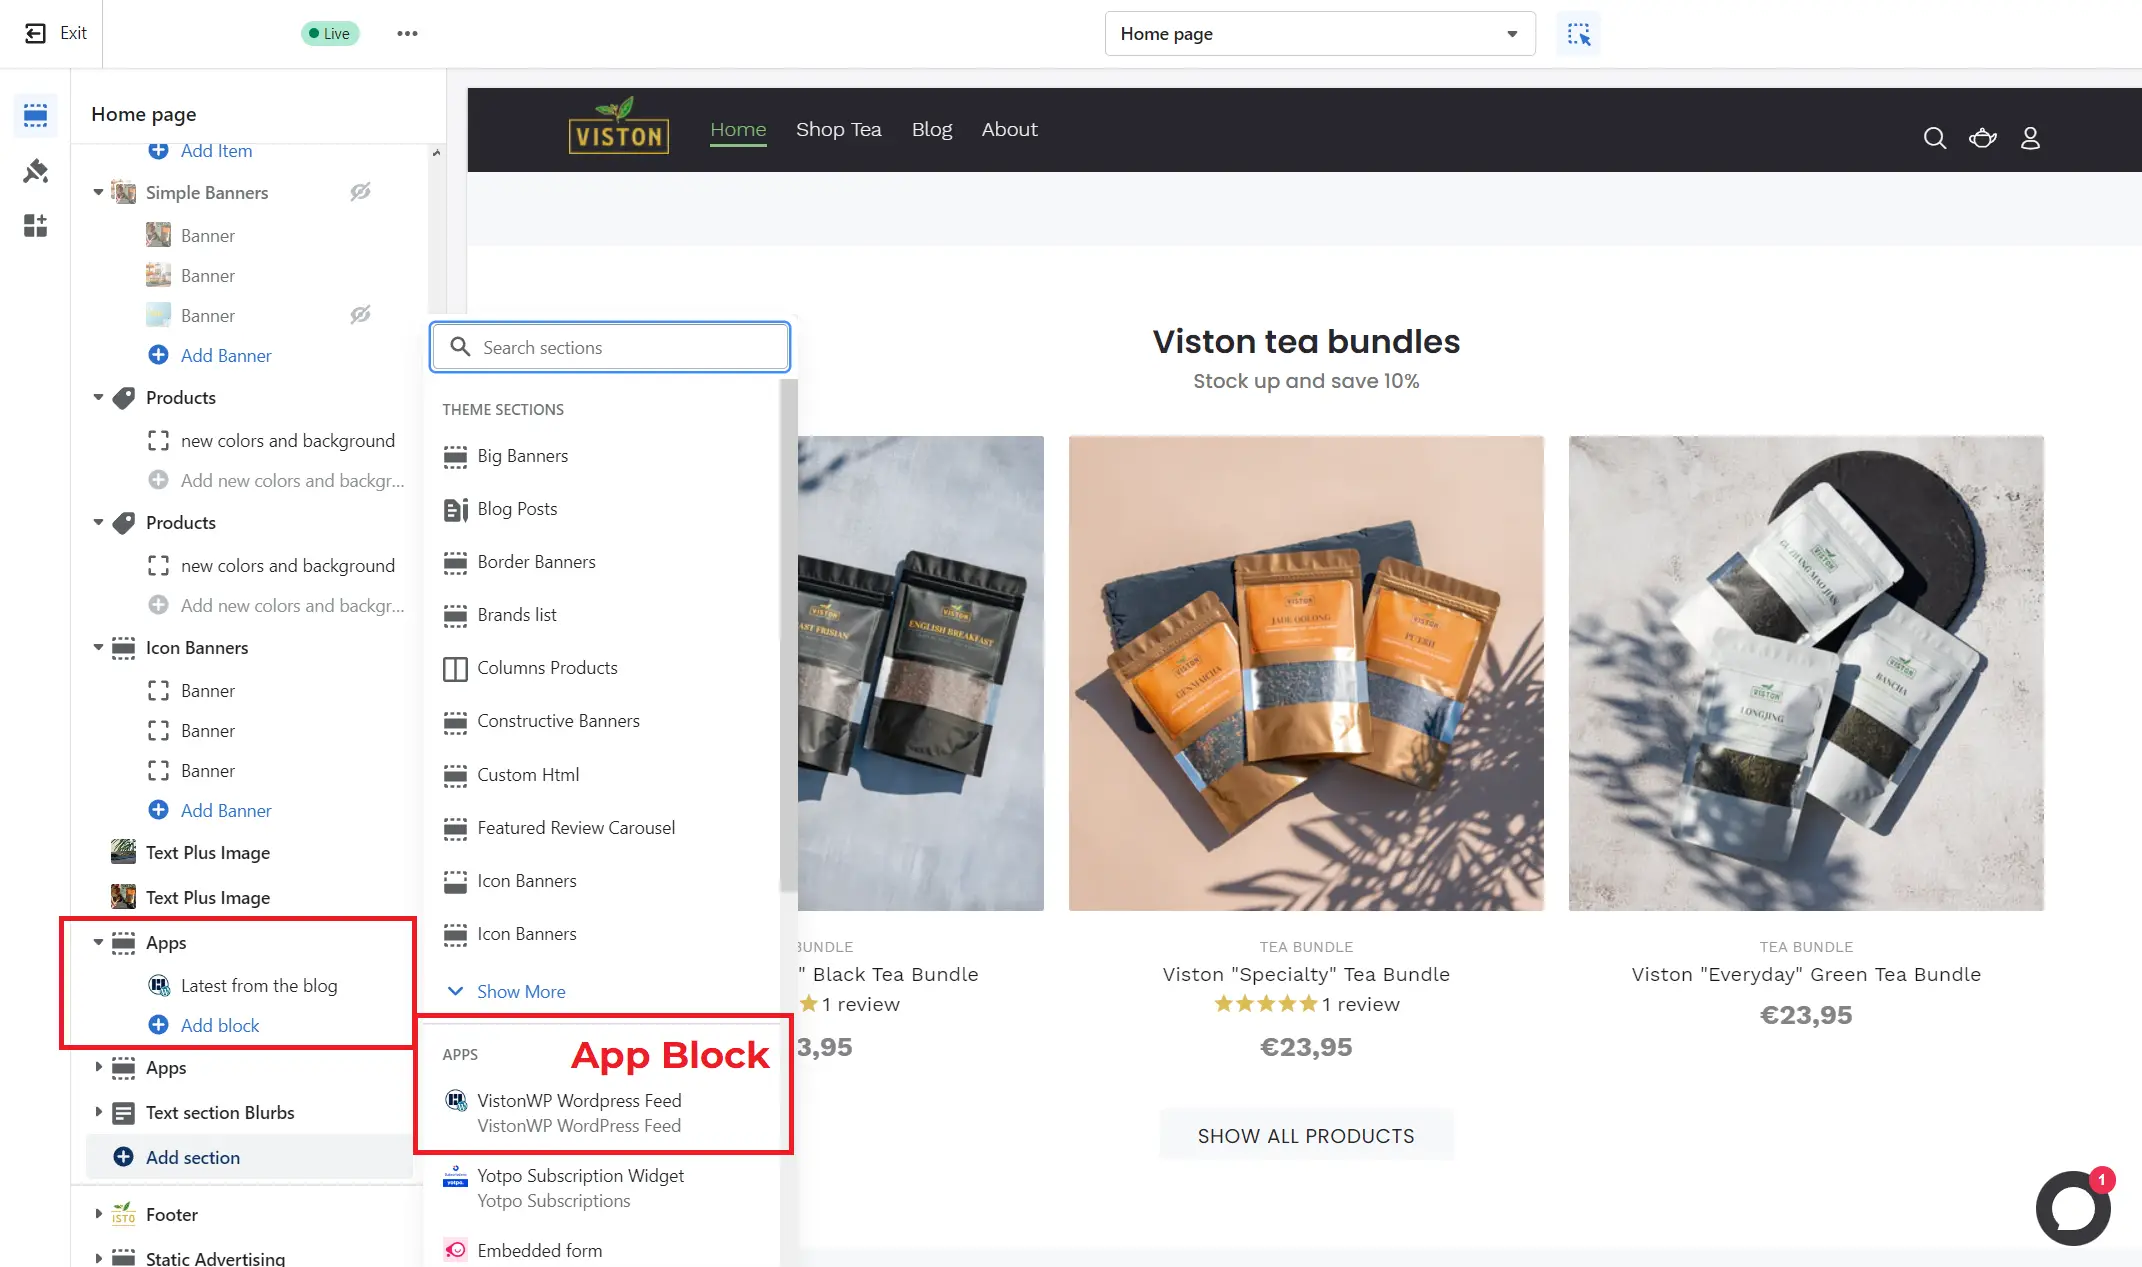 Want to Build a Shopify App? Here’s What You Should Know